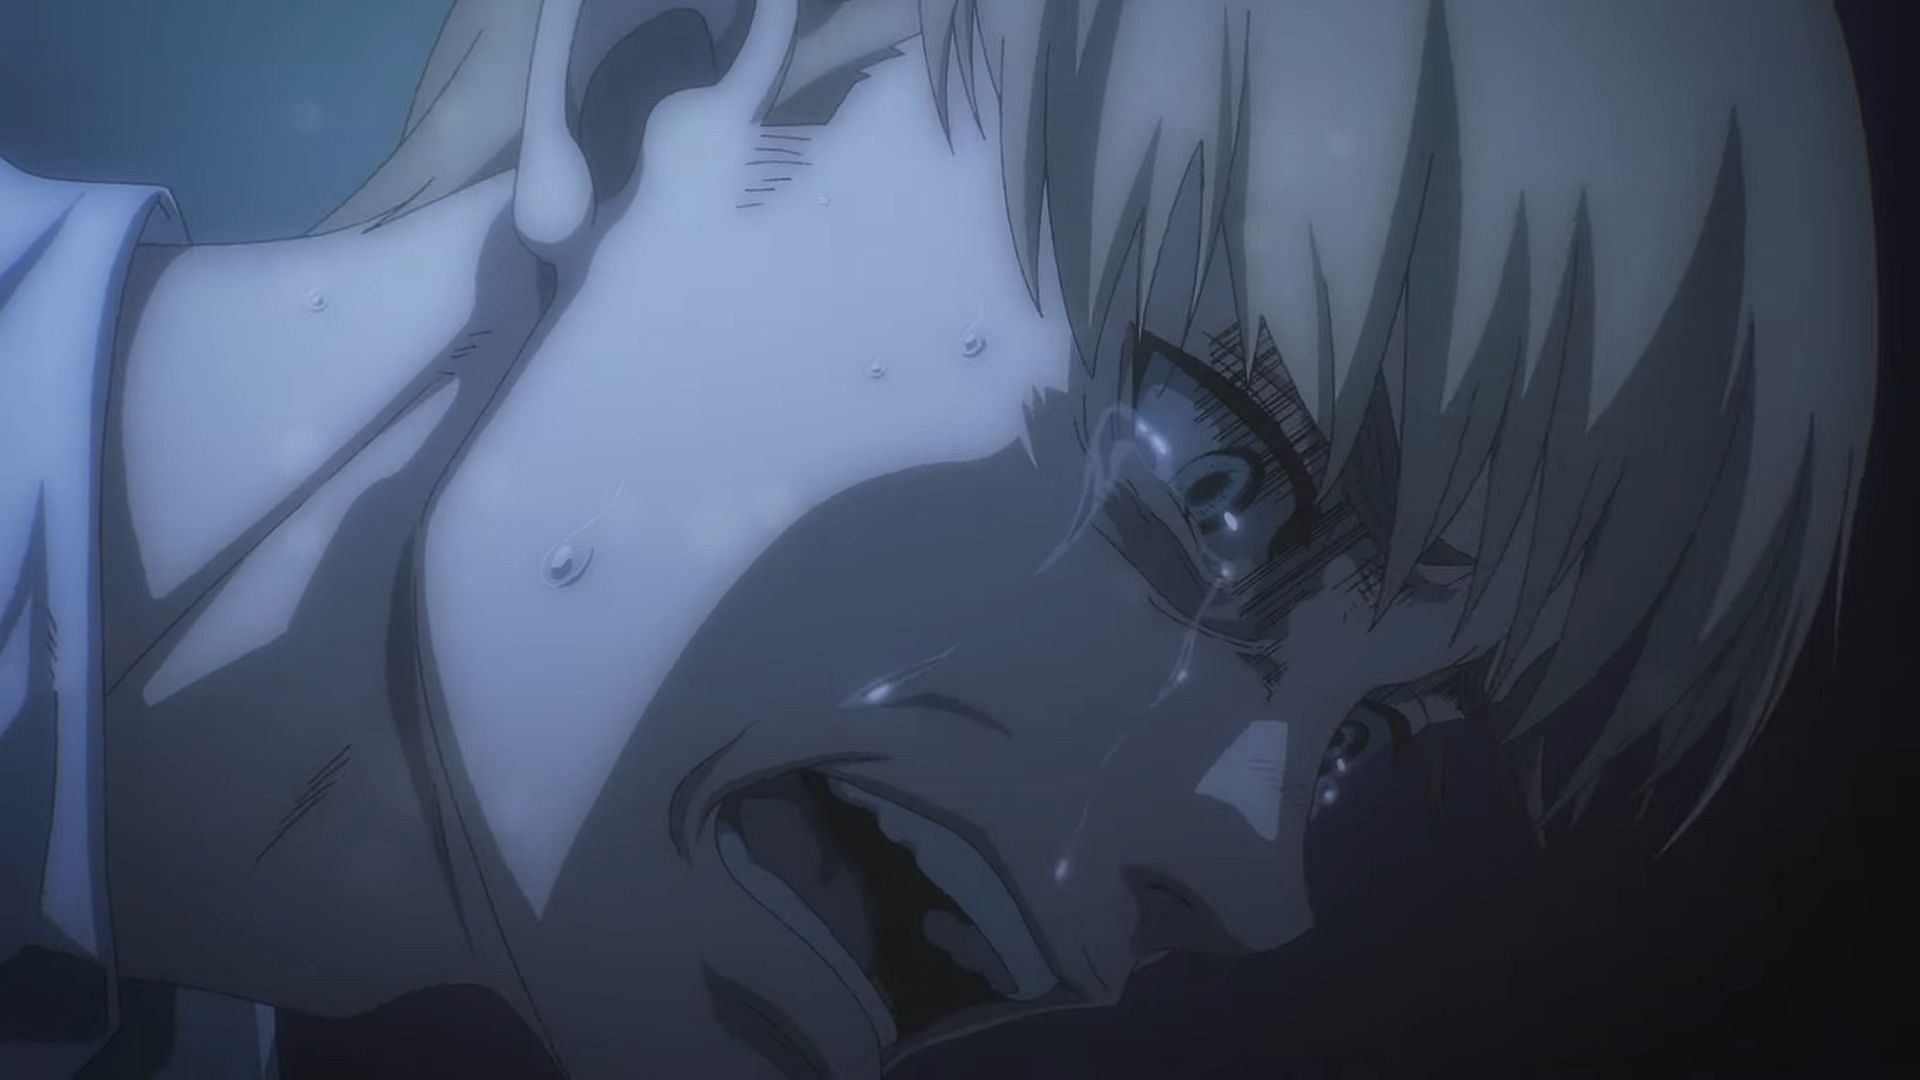 Armin Arlert as seen in the trailer for the upcoming finale of Attack on Titan (Image via MAPPA)